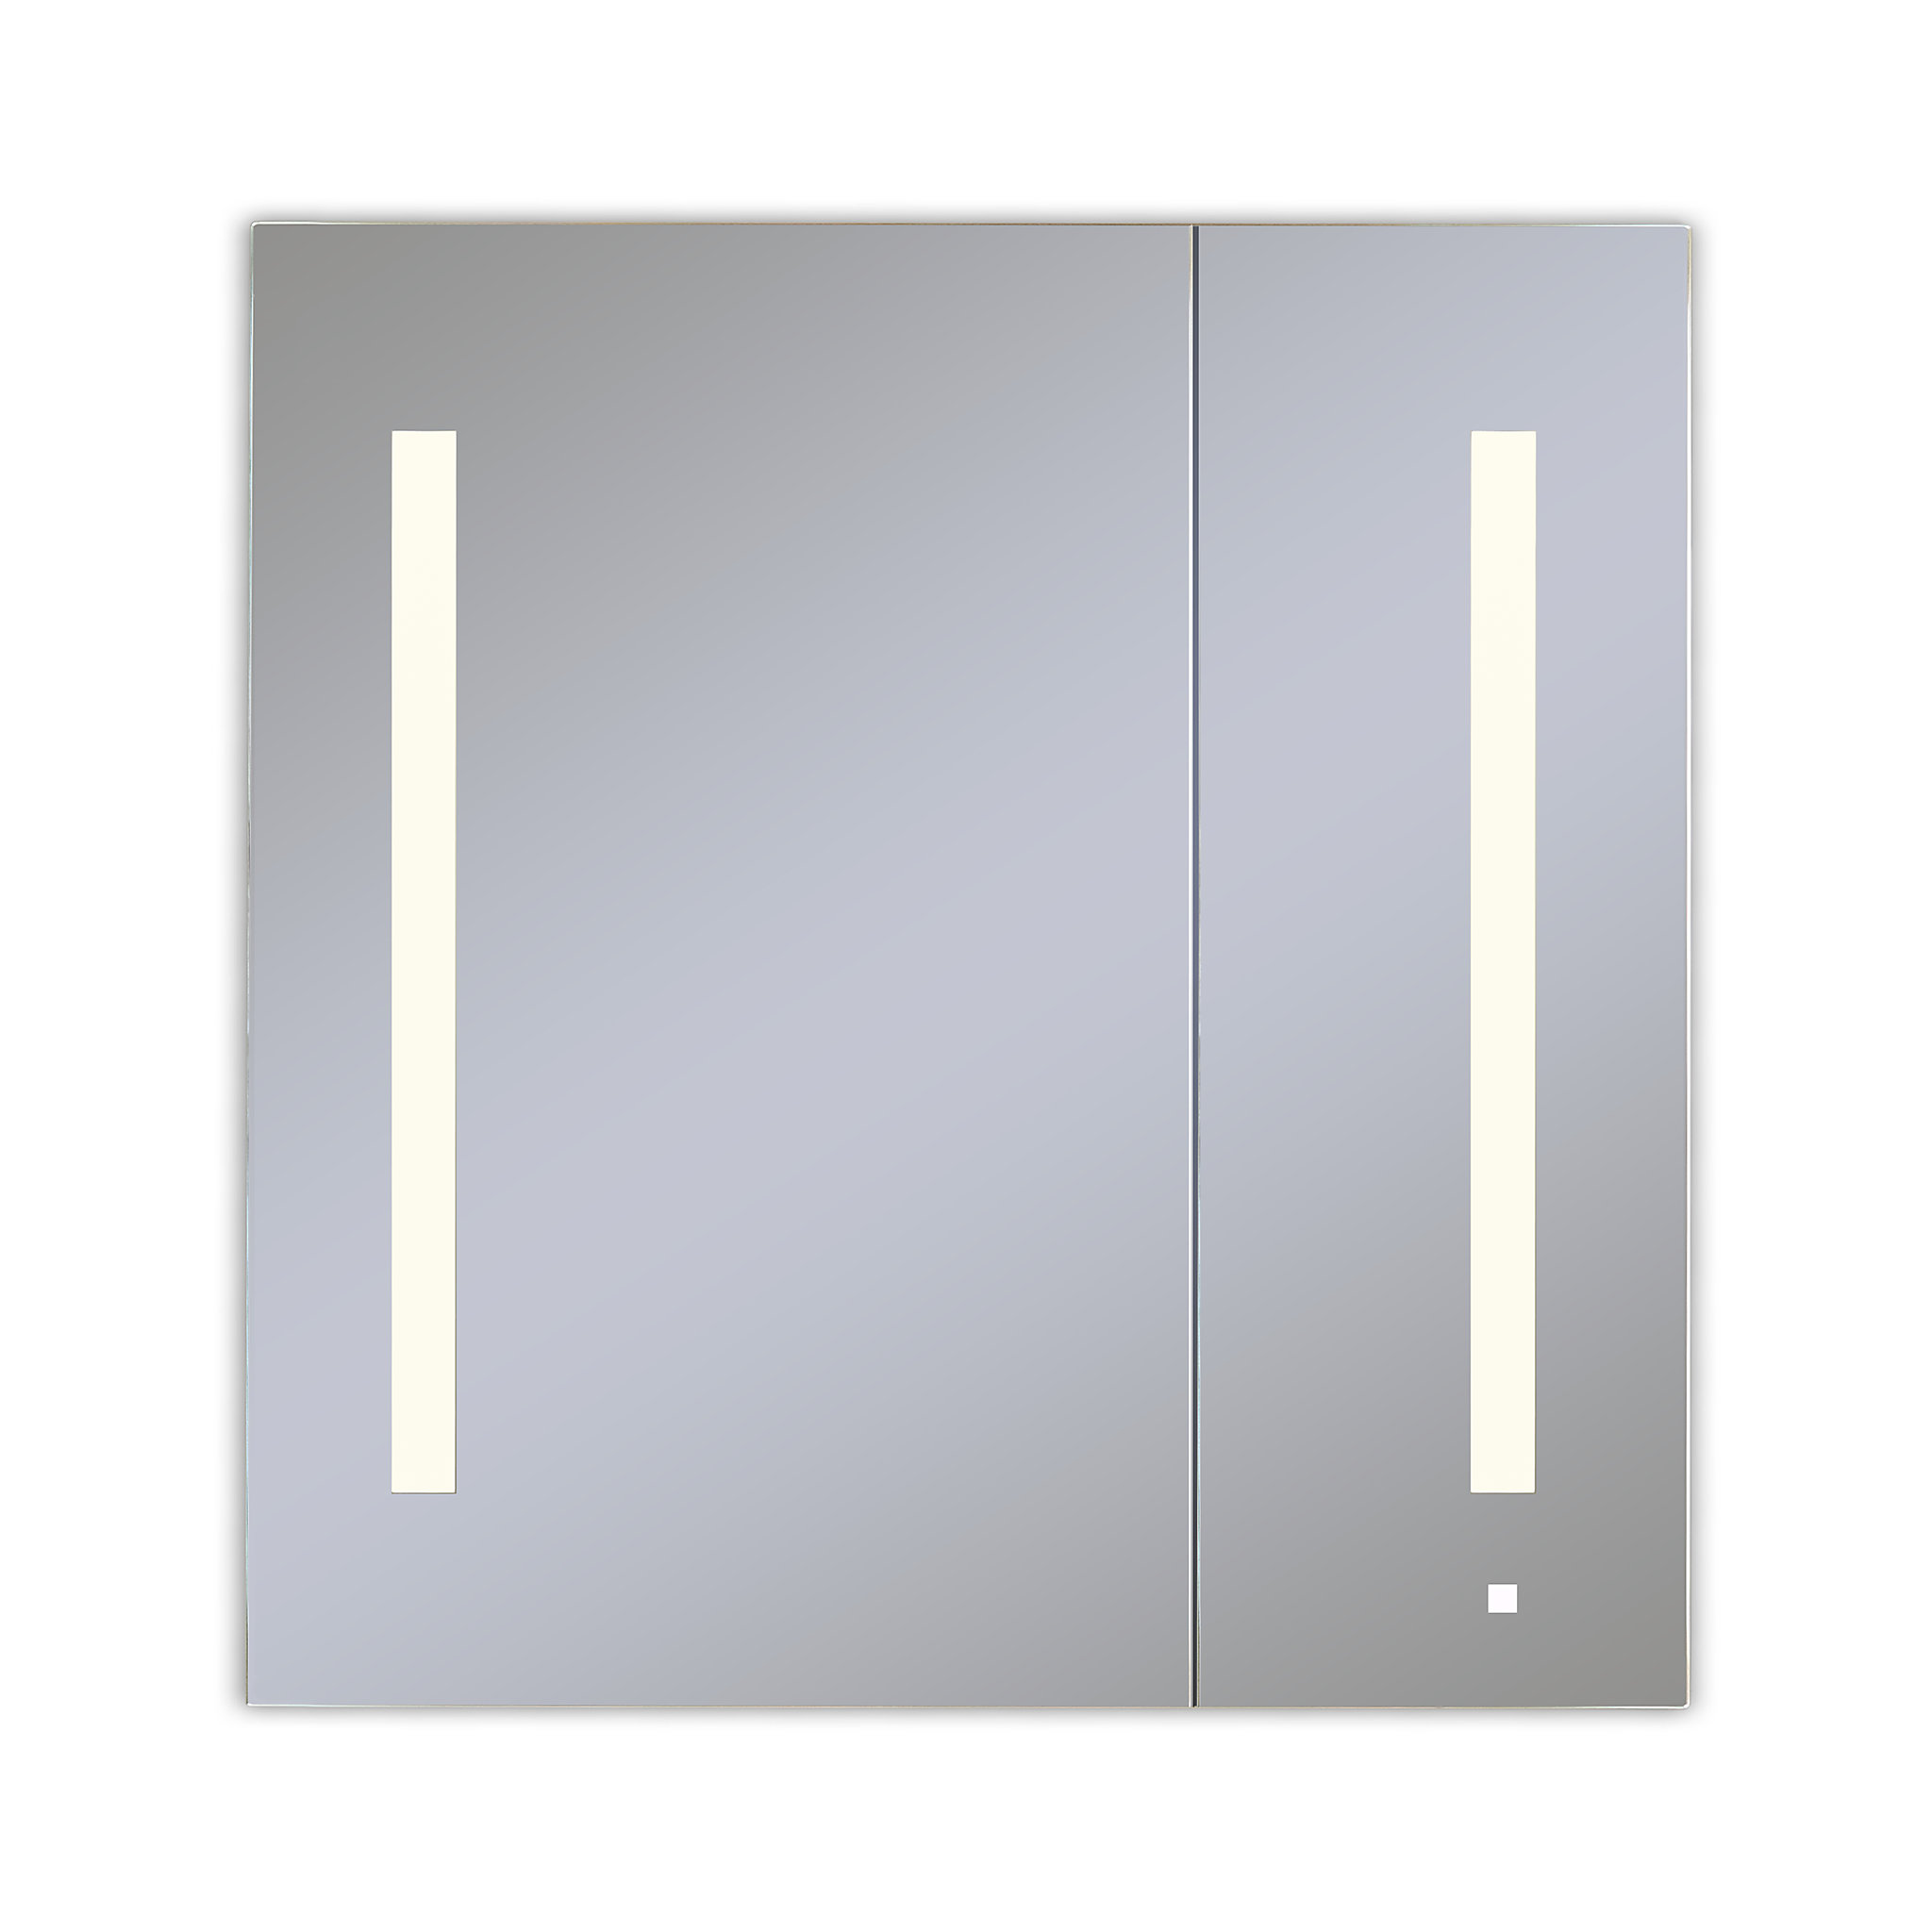 Robern AC3030D4P2LAW AiO Lighted Cabinet, 30" x 30" x 4", Two Door, LUM Lighting, 2700K Temperature (Warm Light), Dimmable, OM A